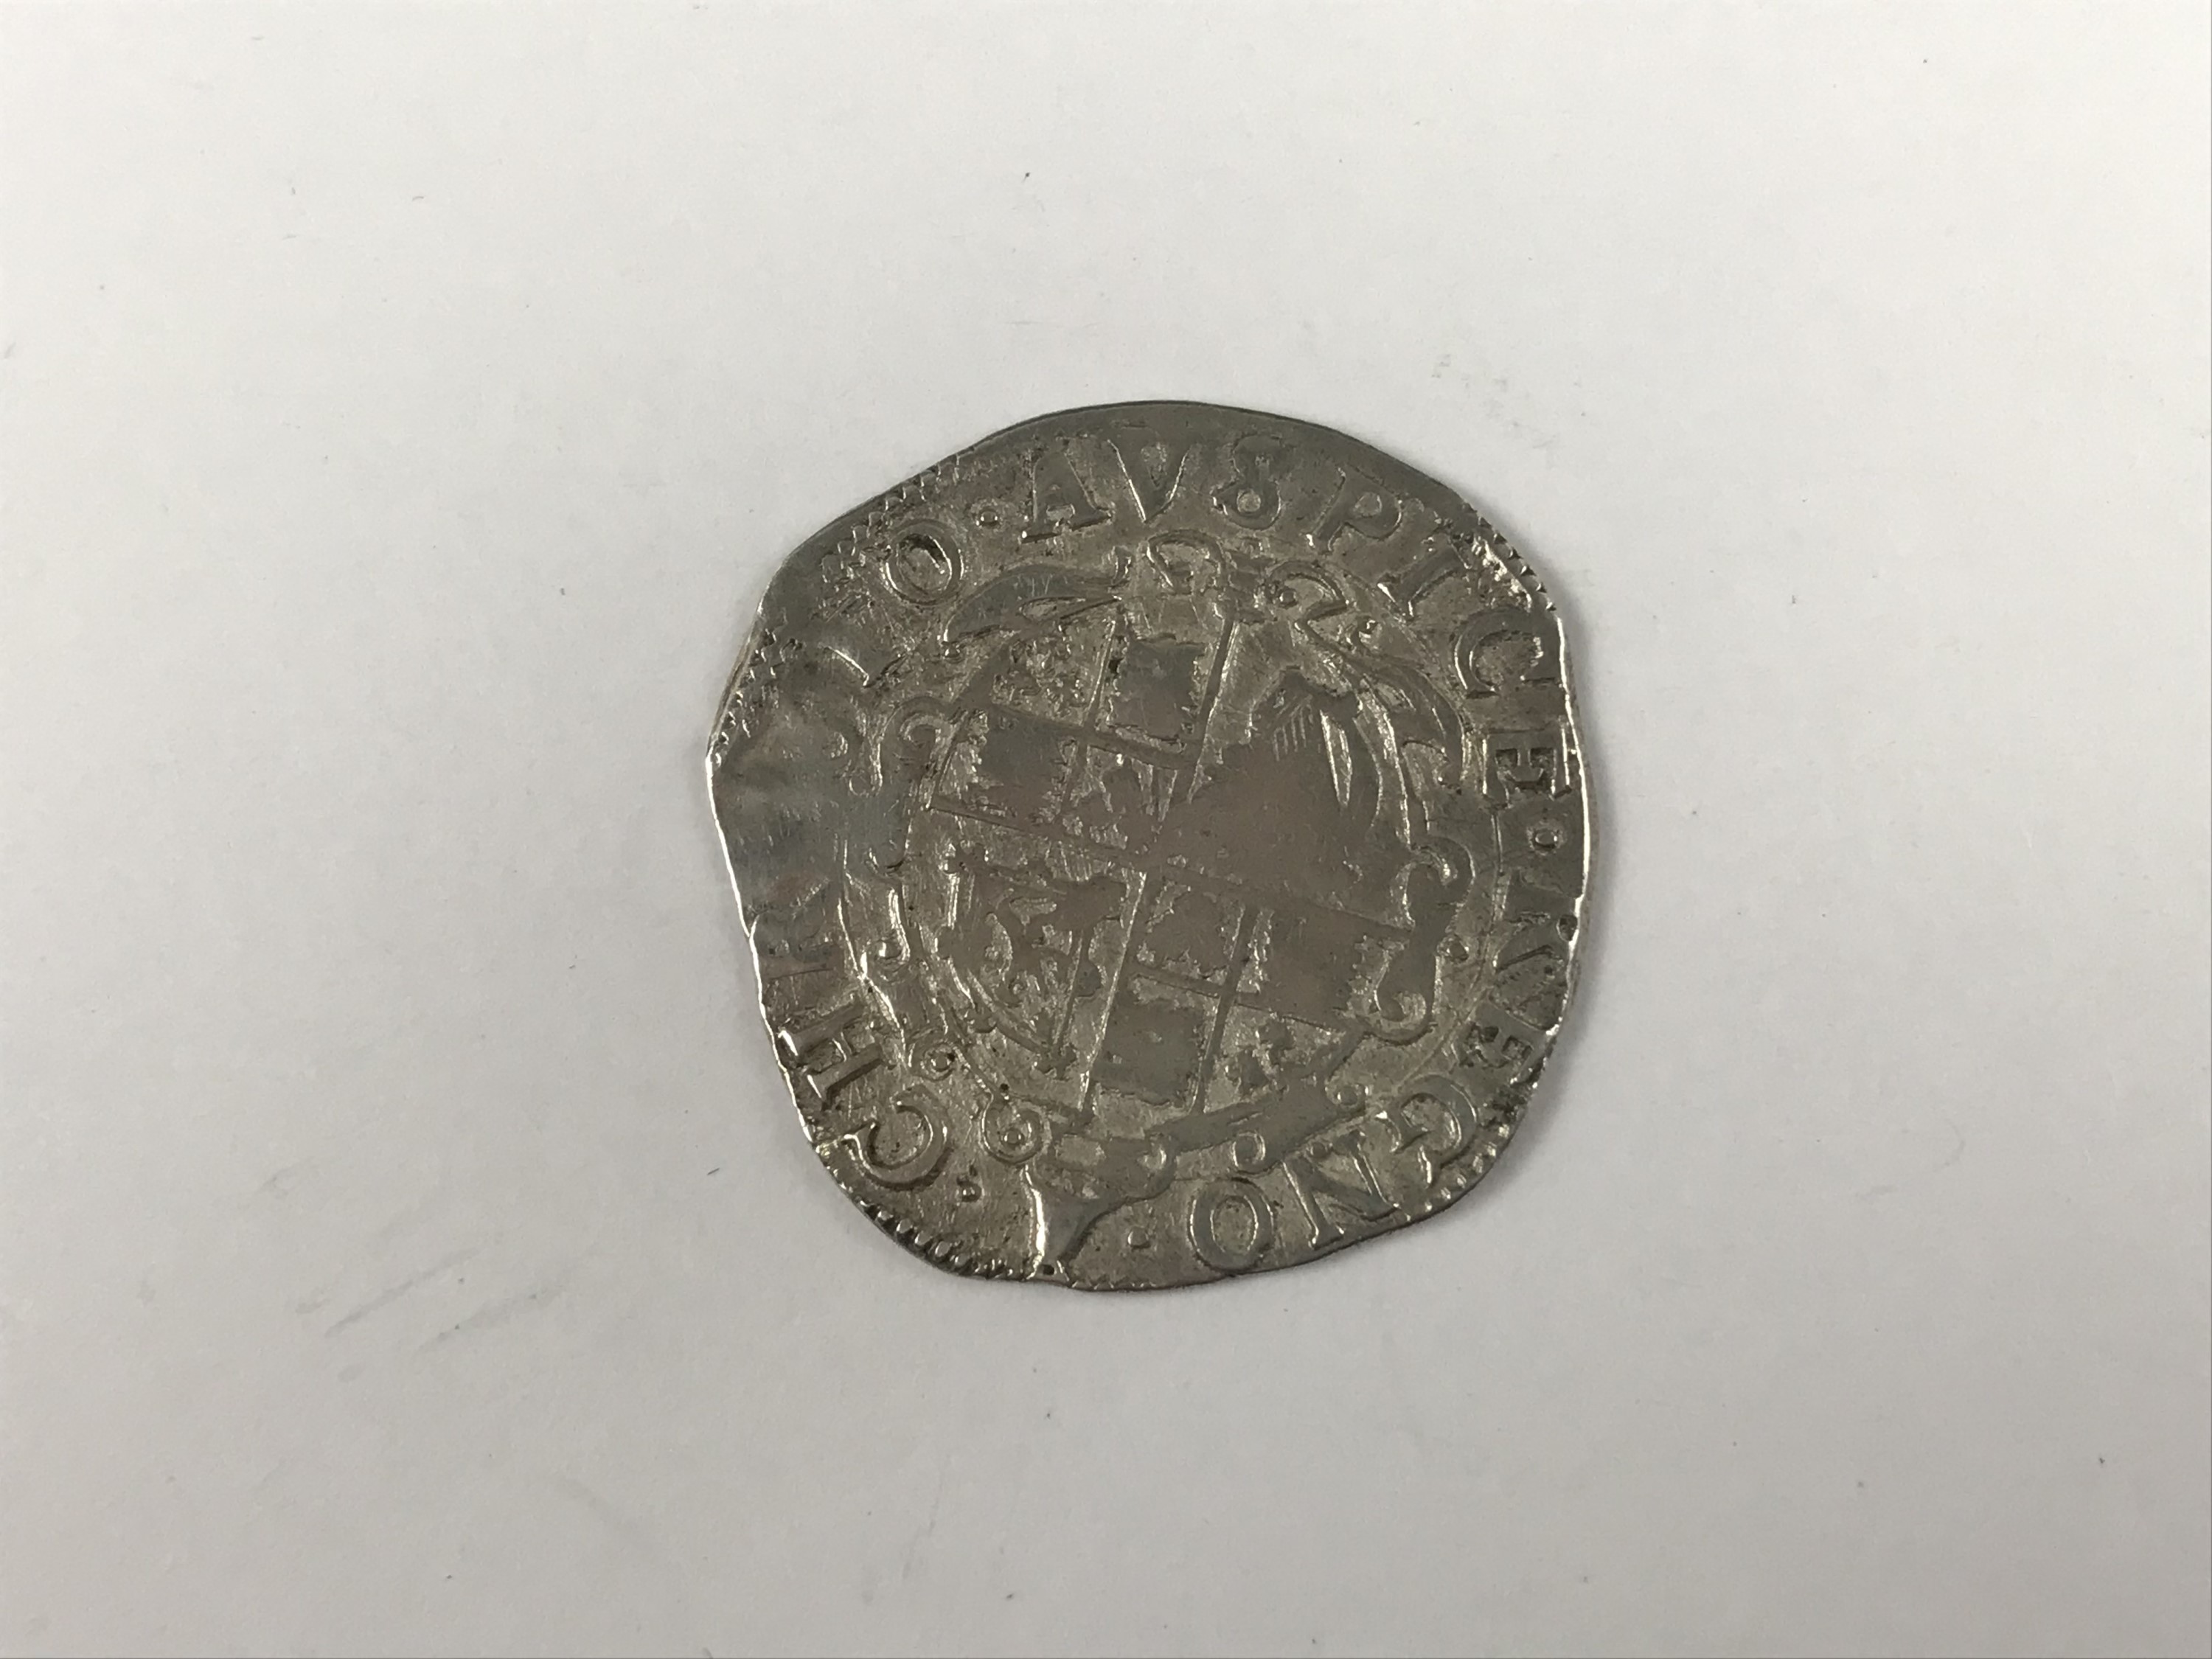 A Charles I hammered silver shilling coin, mint mark Bell (1634-5) - Image 2 of 2